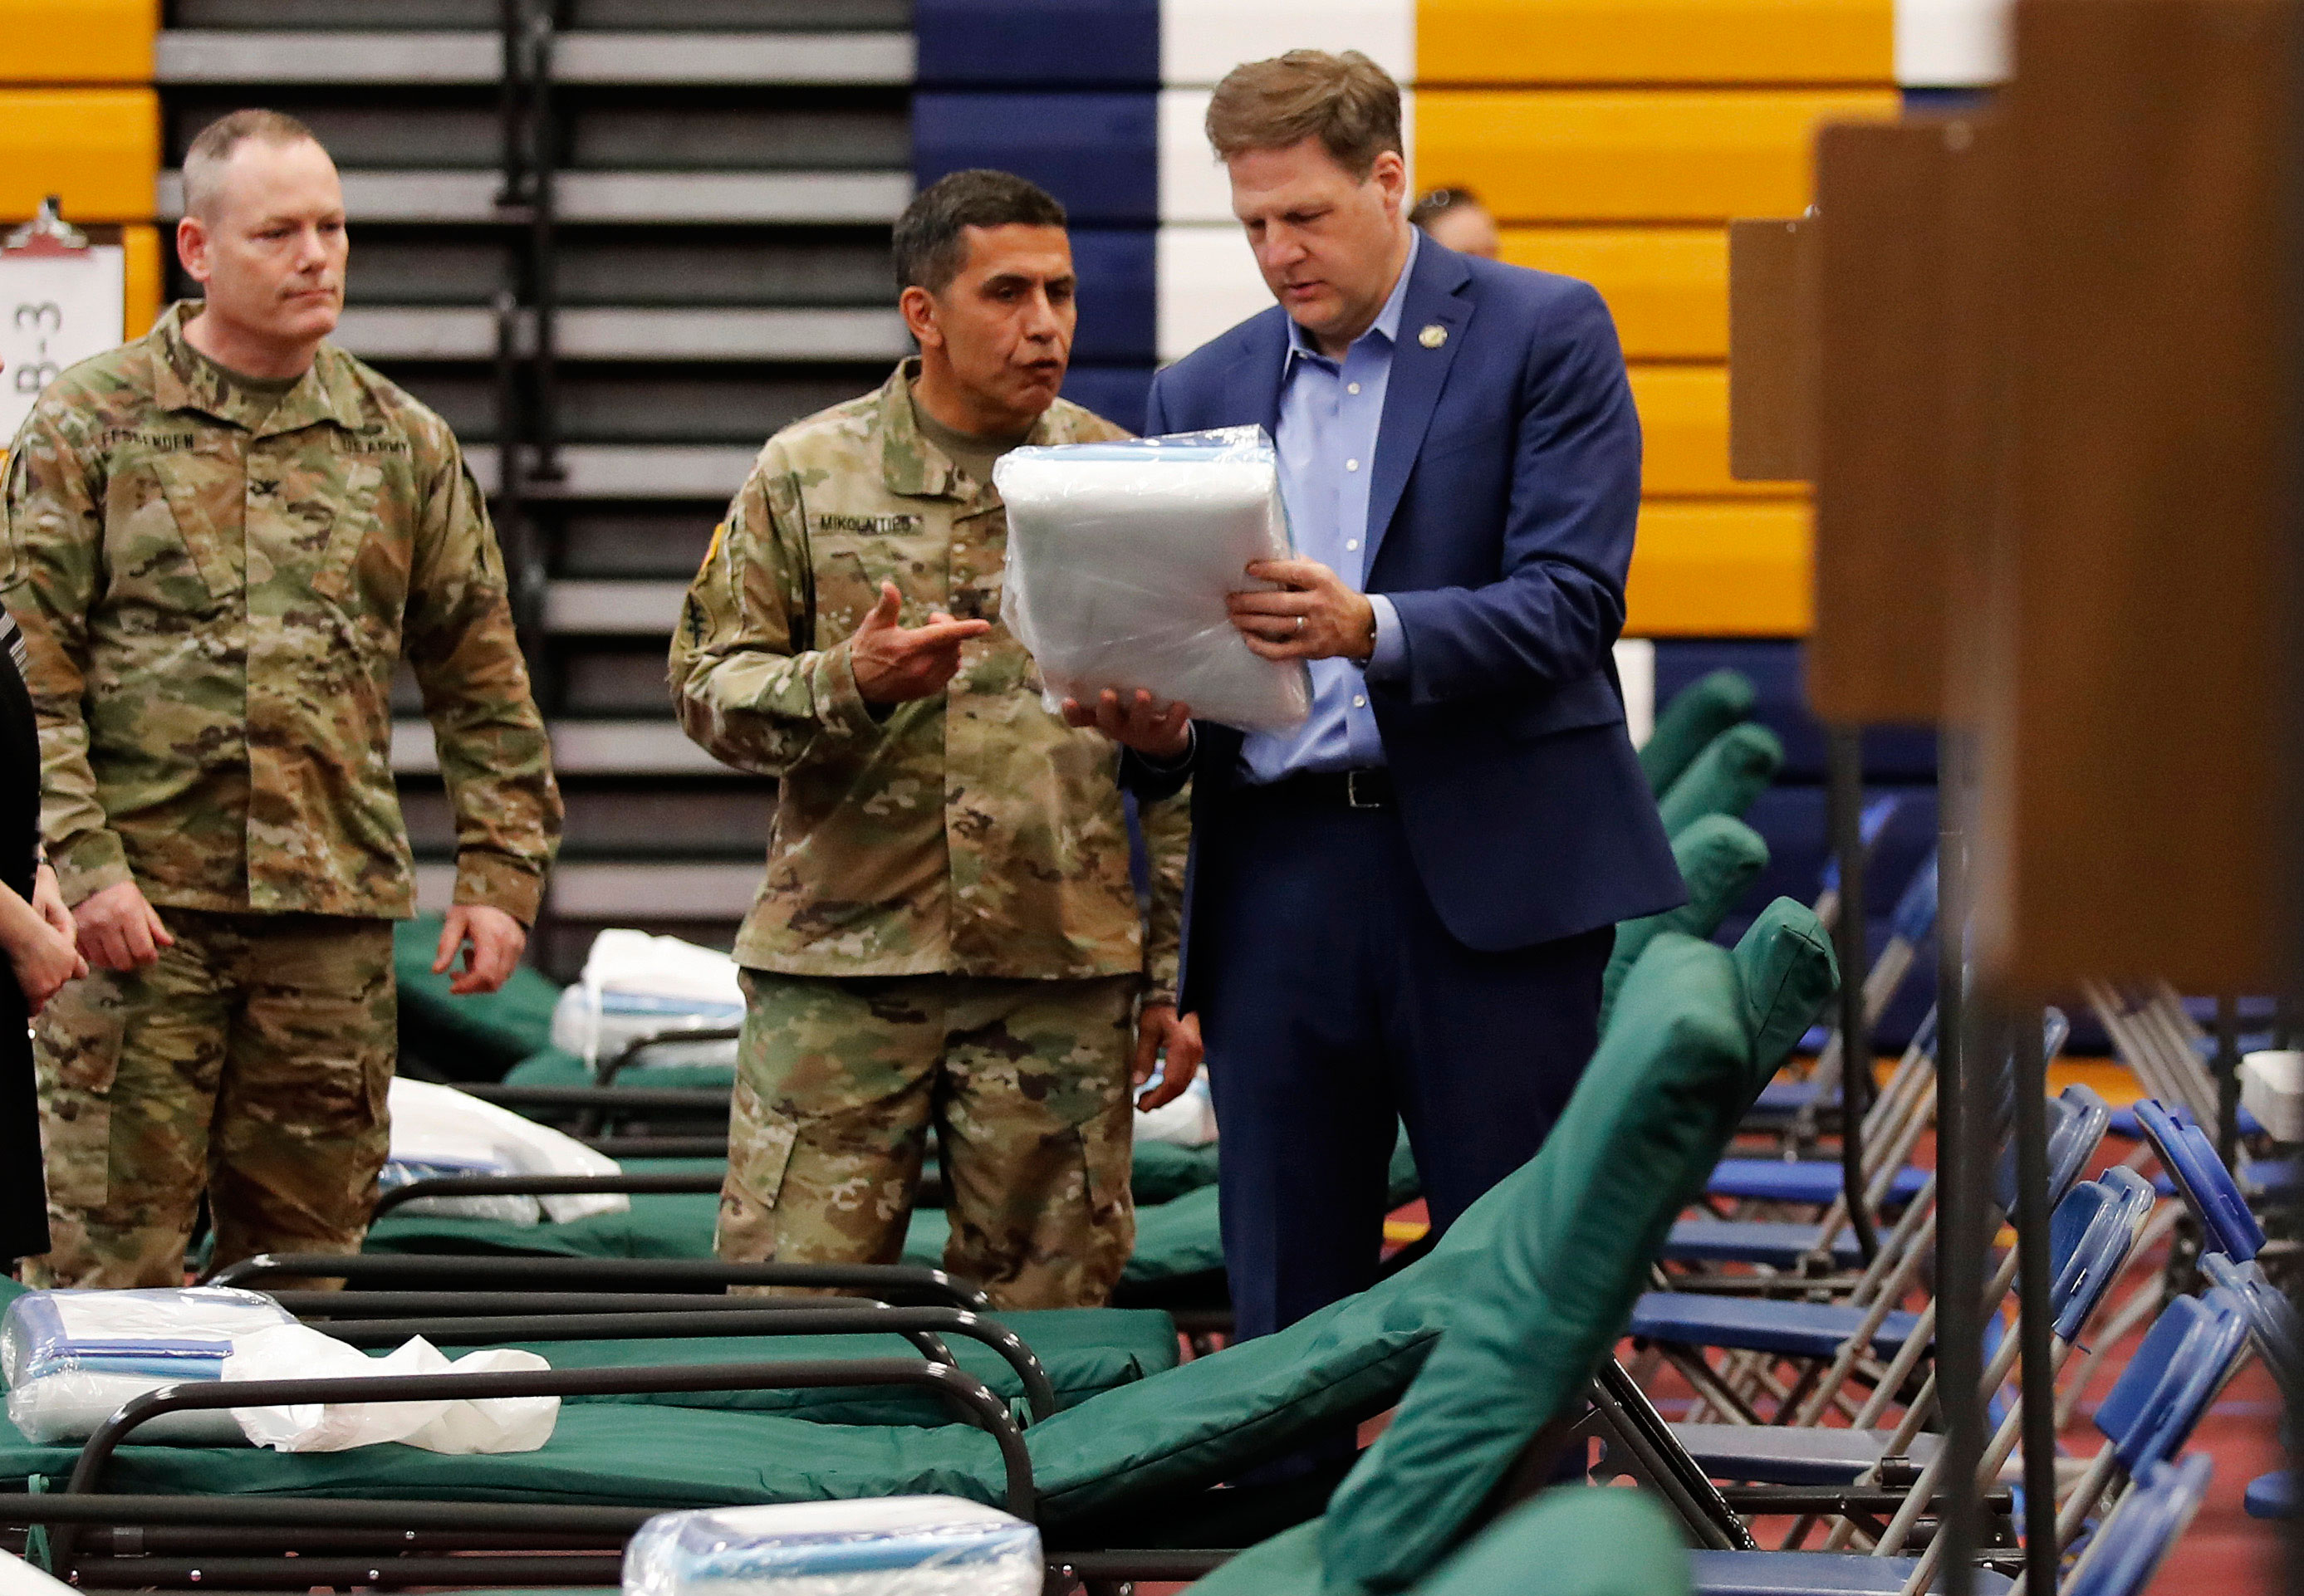 New Hampshire Gov. Chris Sununu, right, tours a makeshift medical facility at Southern New Hampshire University in Manchester, New Hampshire on March 24.